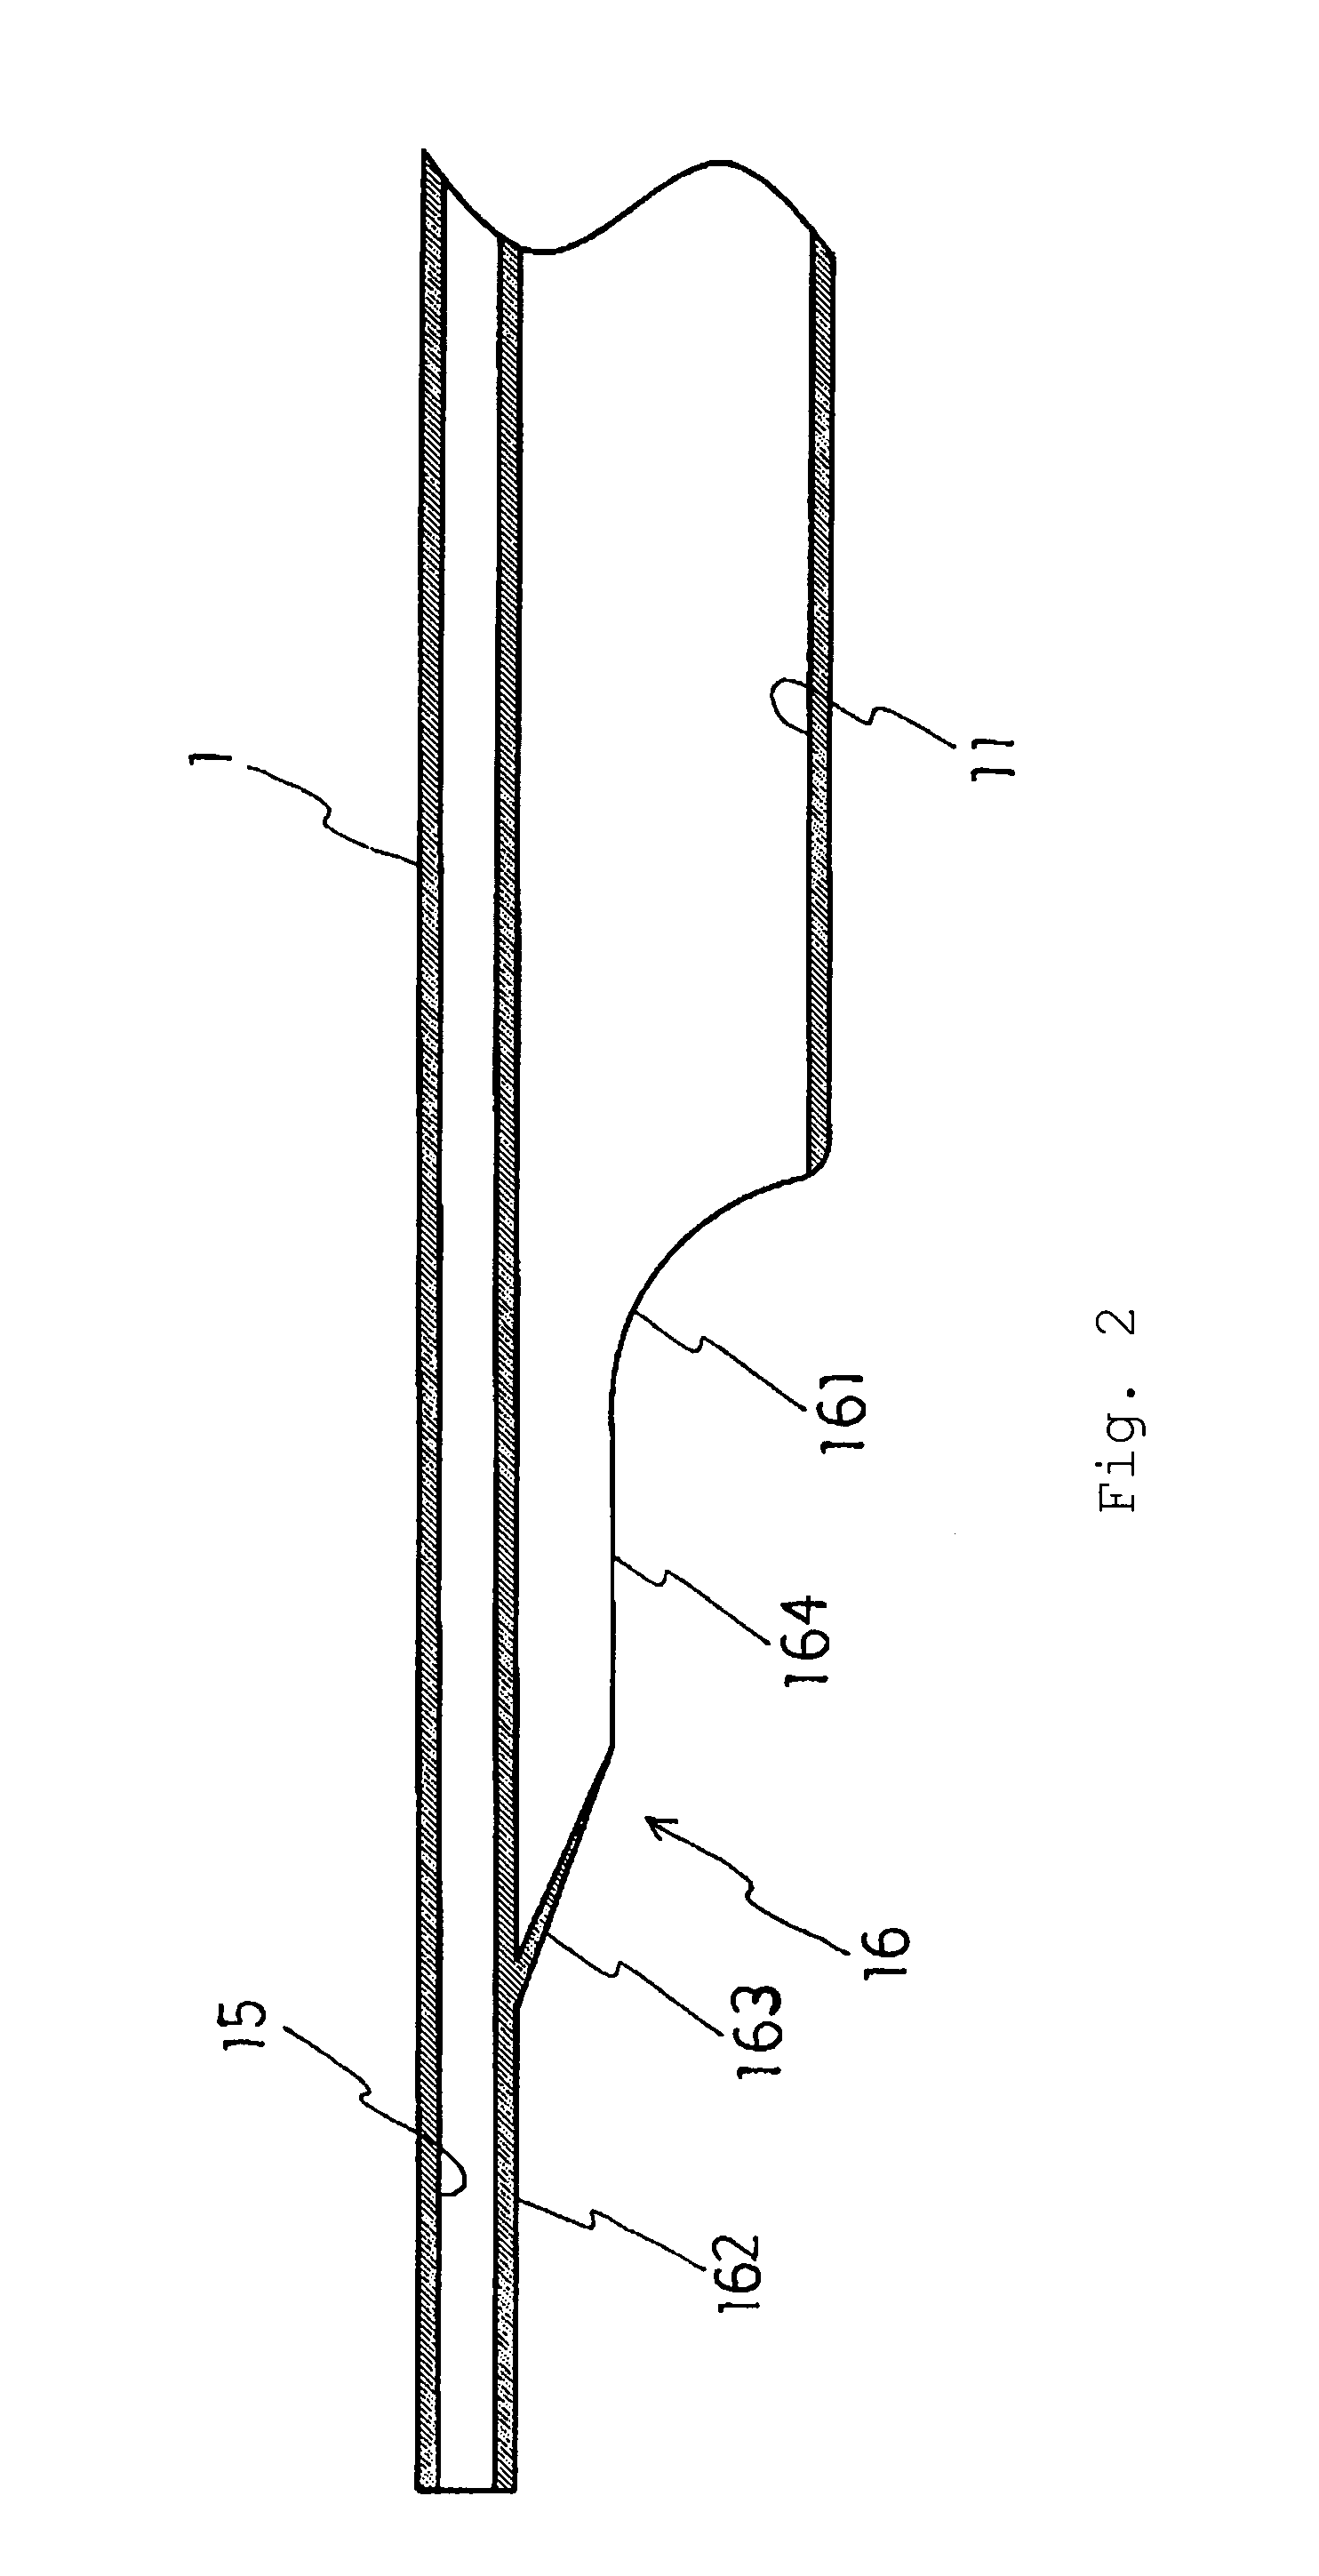 Thrombus suction catheter with improved suction and crossing